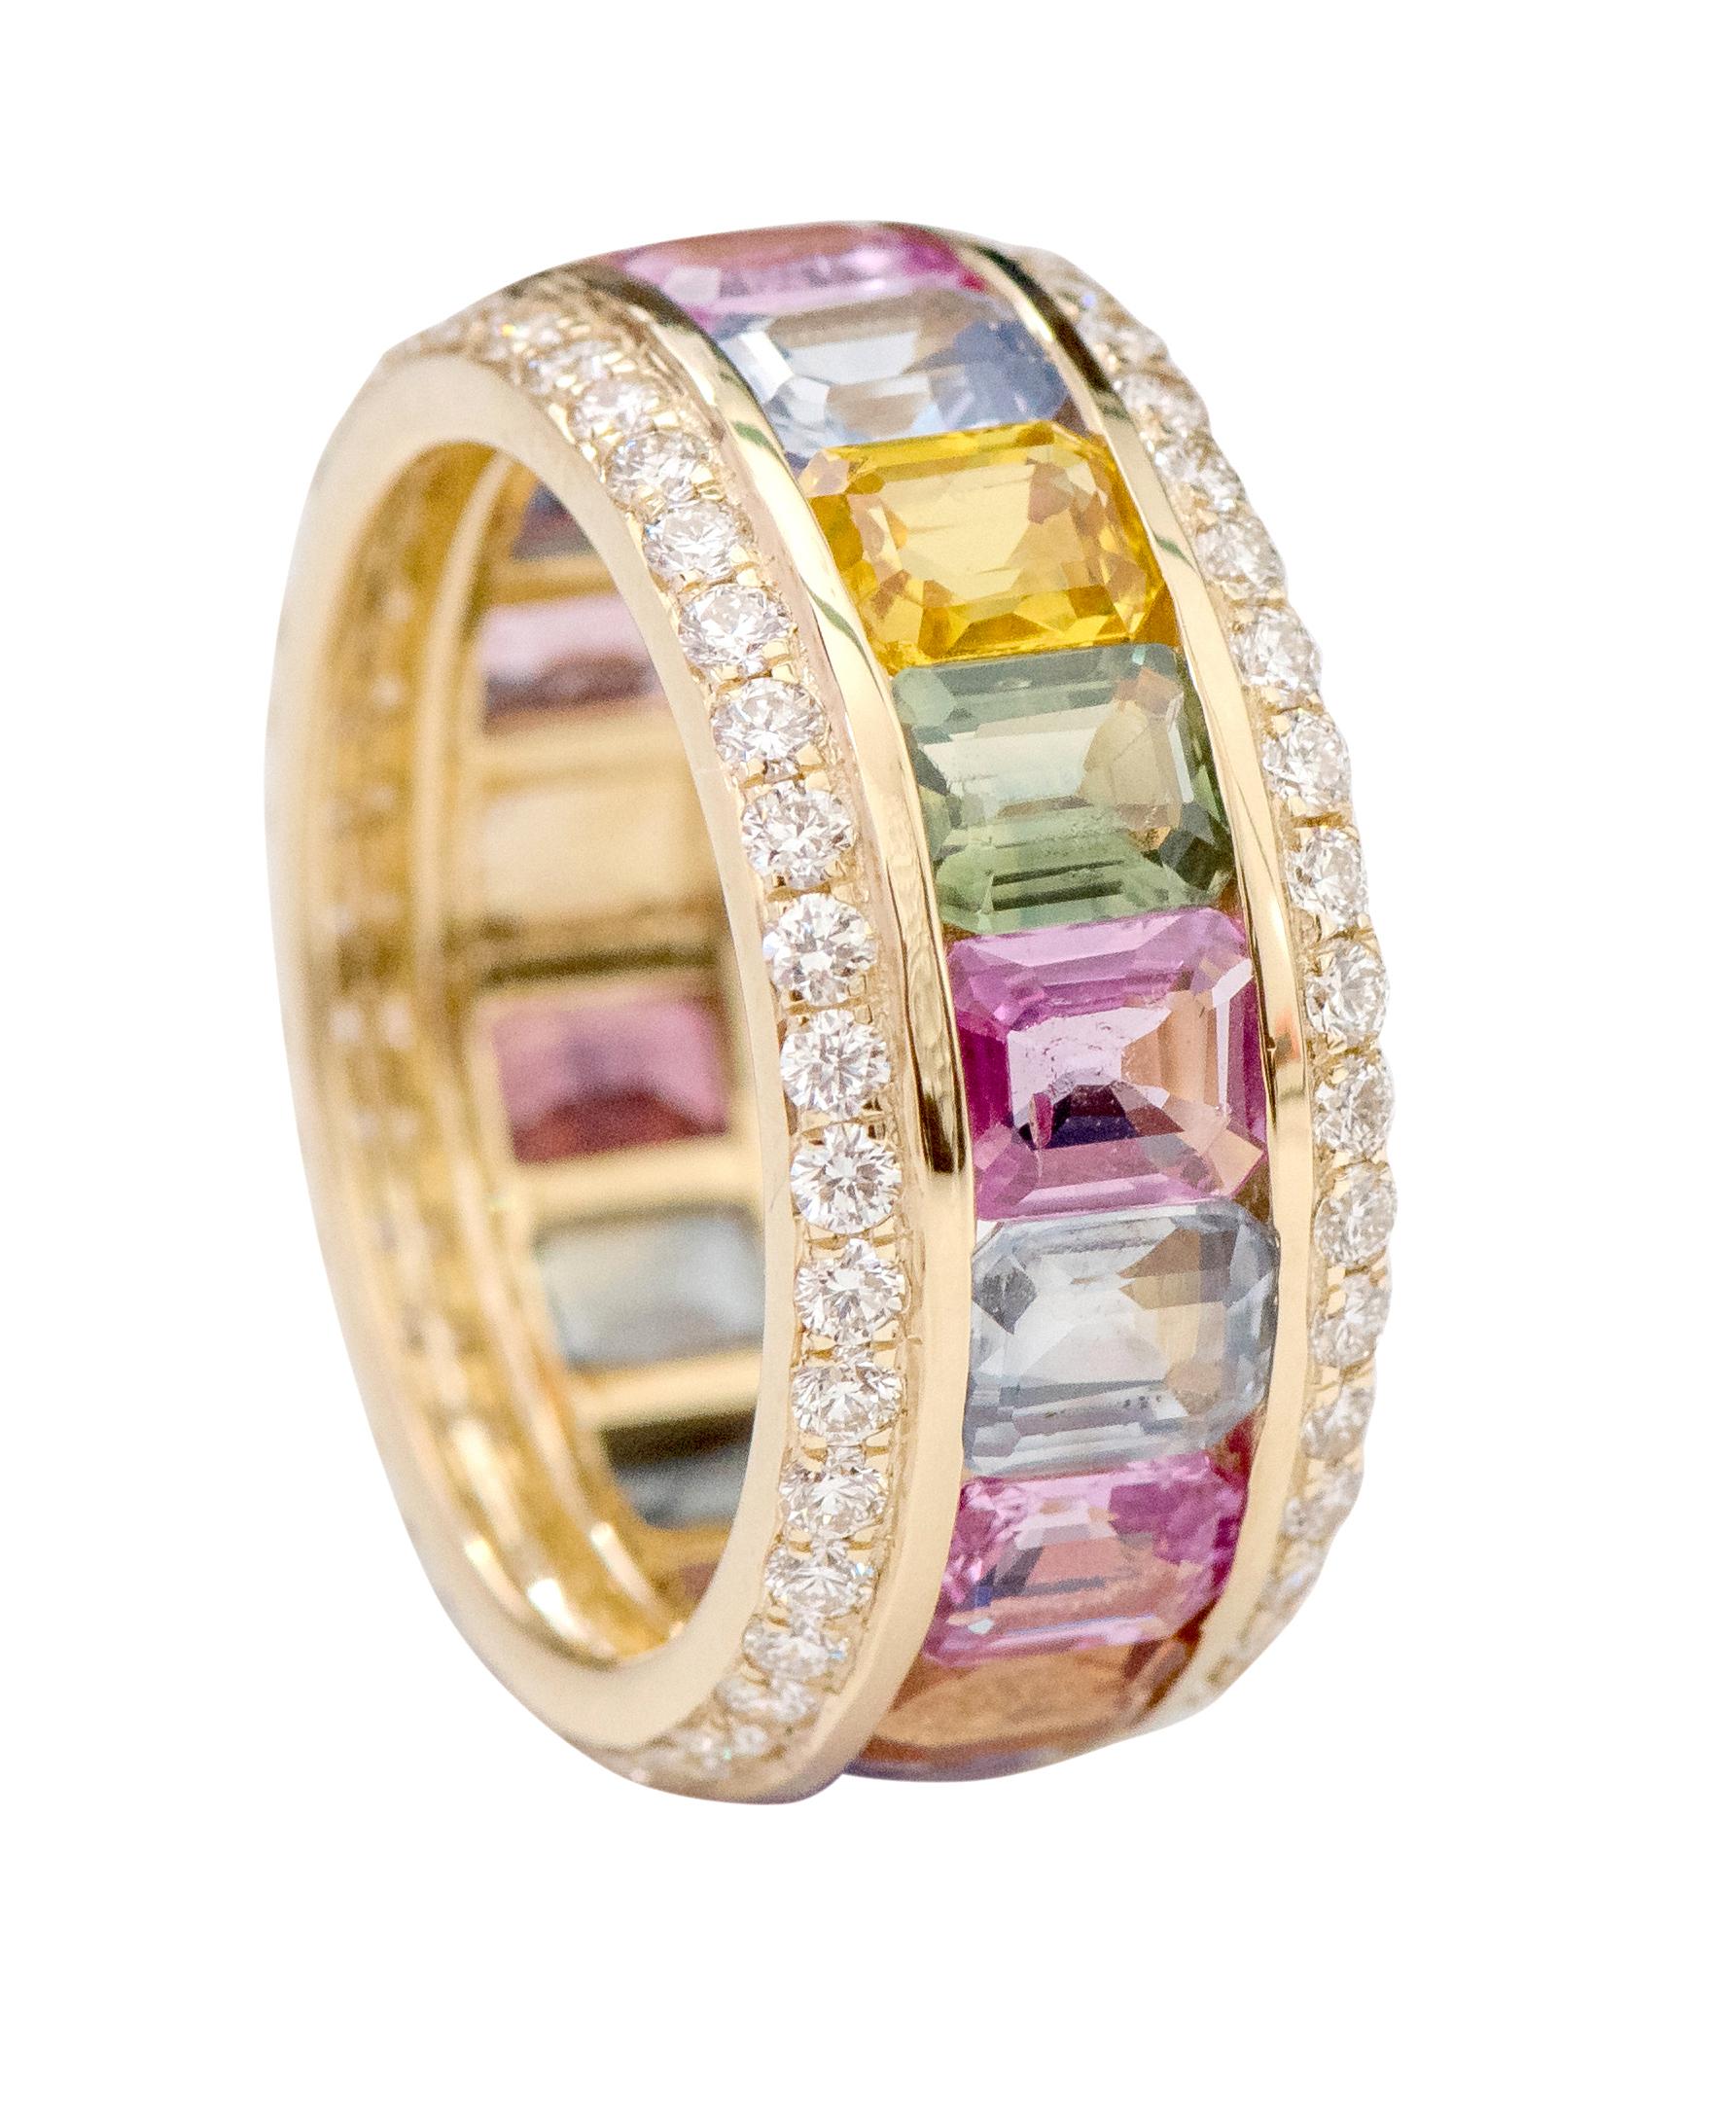 18 Karat Yellow Gold 8.62 Carat Emerald-Cut Multi-Sapphire and Diamond Eternity Band Ring

This magnanimous rainbow multi-sapphire and diamond band is ingenious. The solitaire horizontally placed emerald-cut multi-sapphires in a side-bezel closed